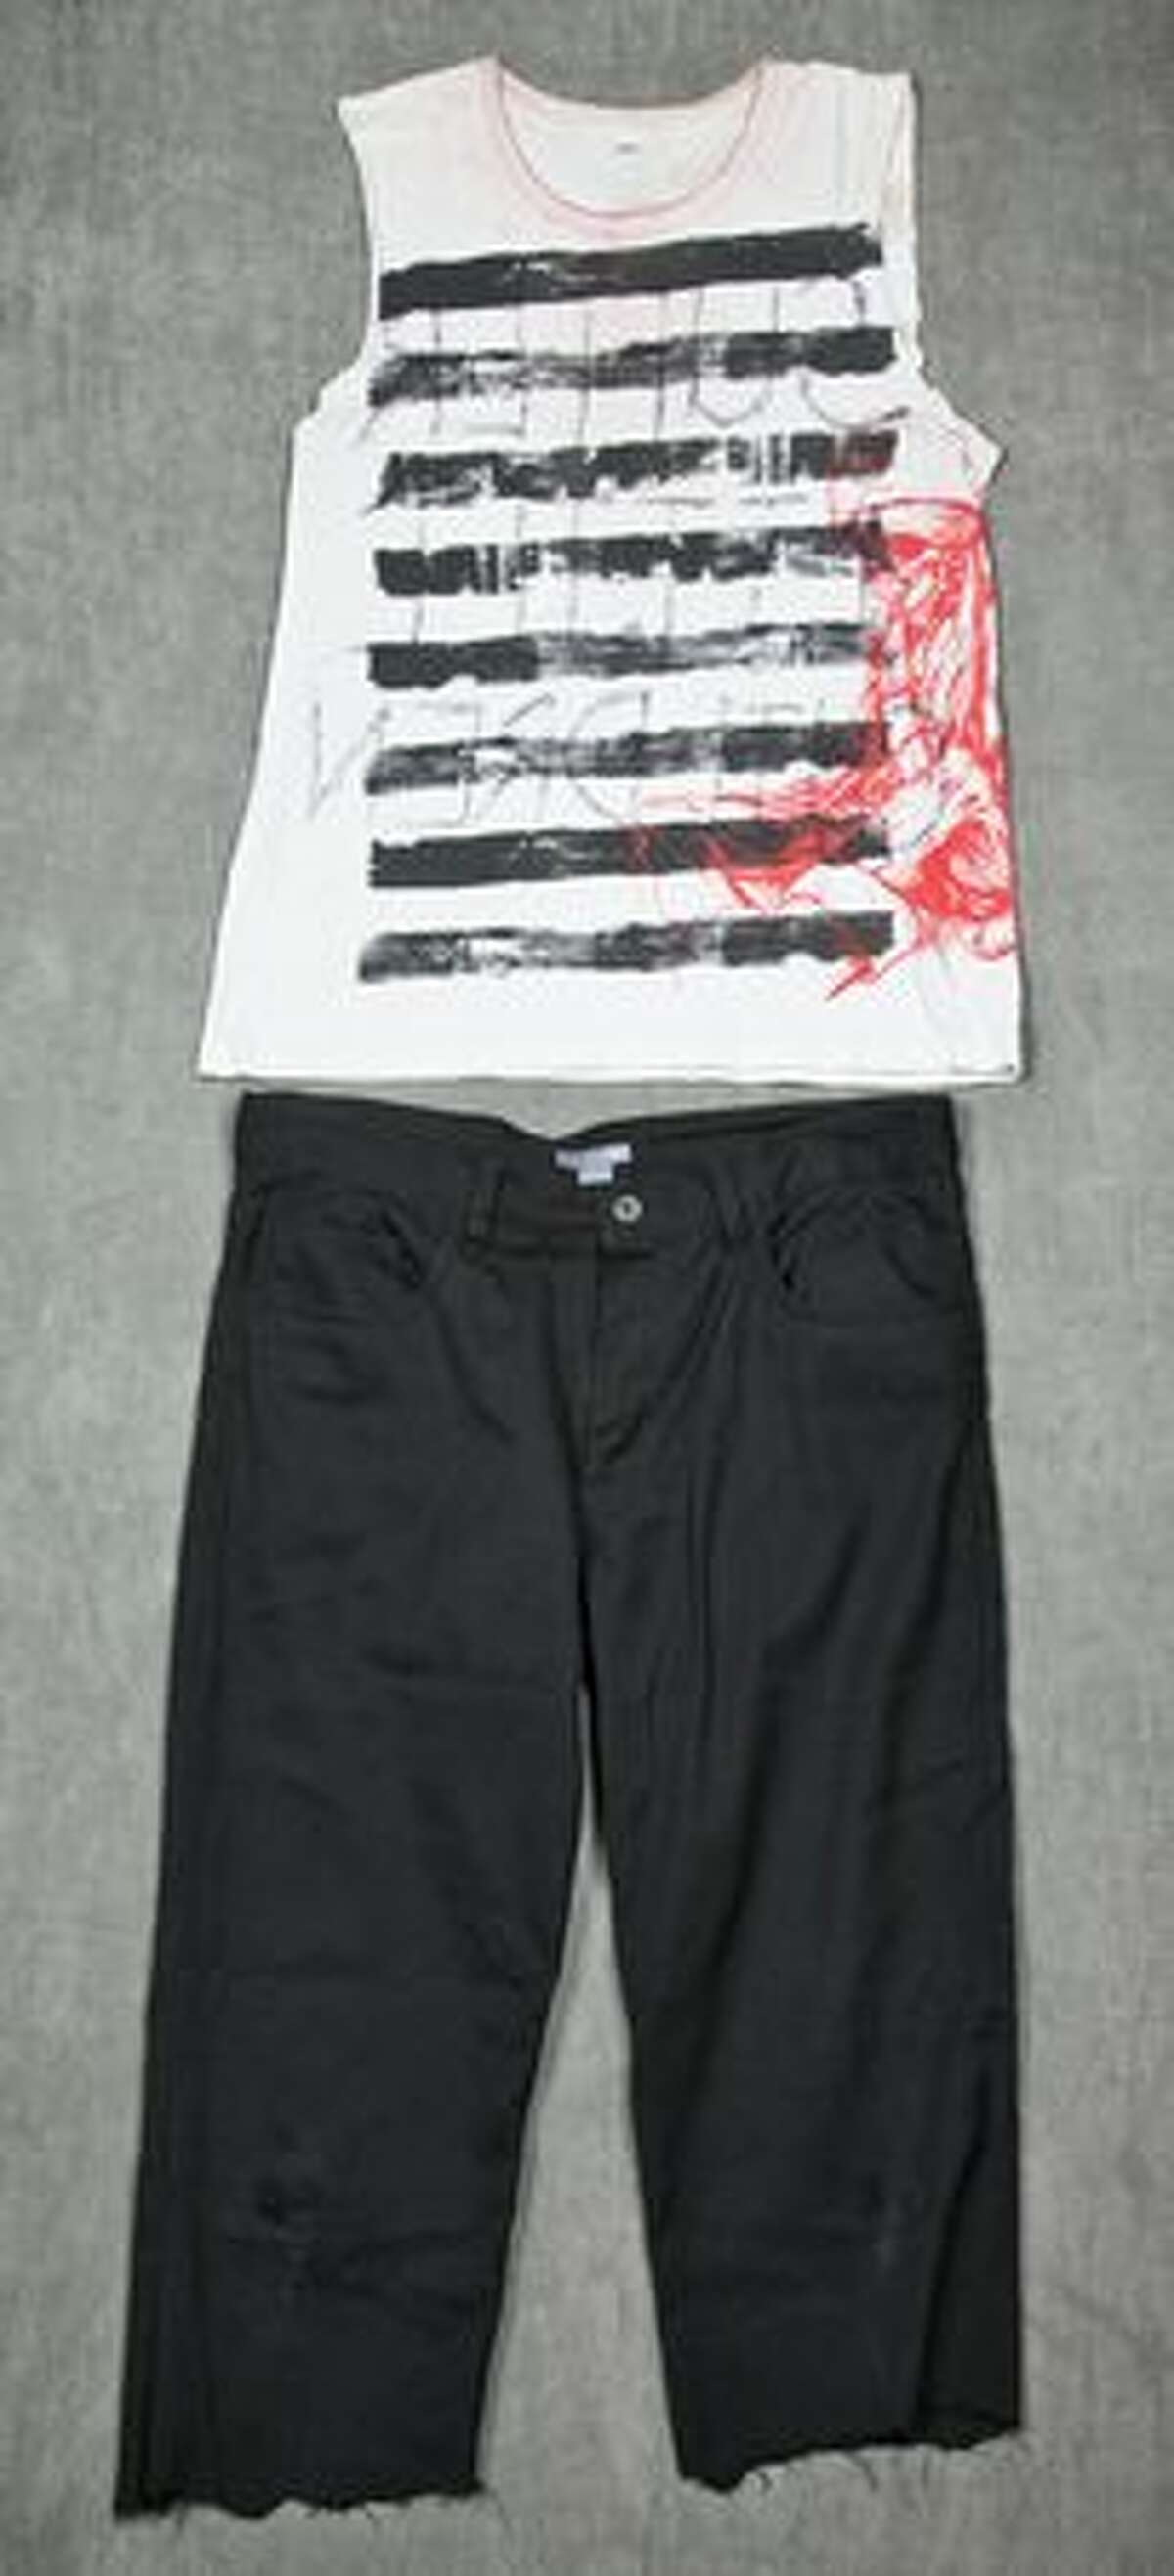 The outfit of William "wiL" Francis frontman for Seattle horrorcore upstarts Aiden. Worn during the "Taste of Chaos" tour in 2007. (Hard Rock International)